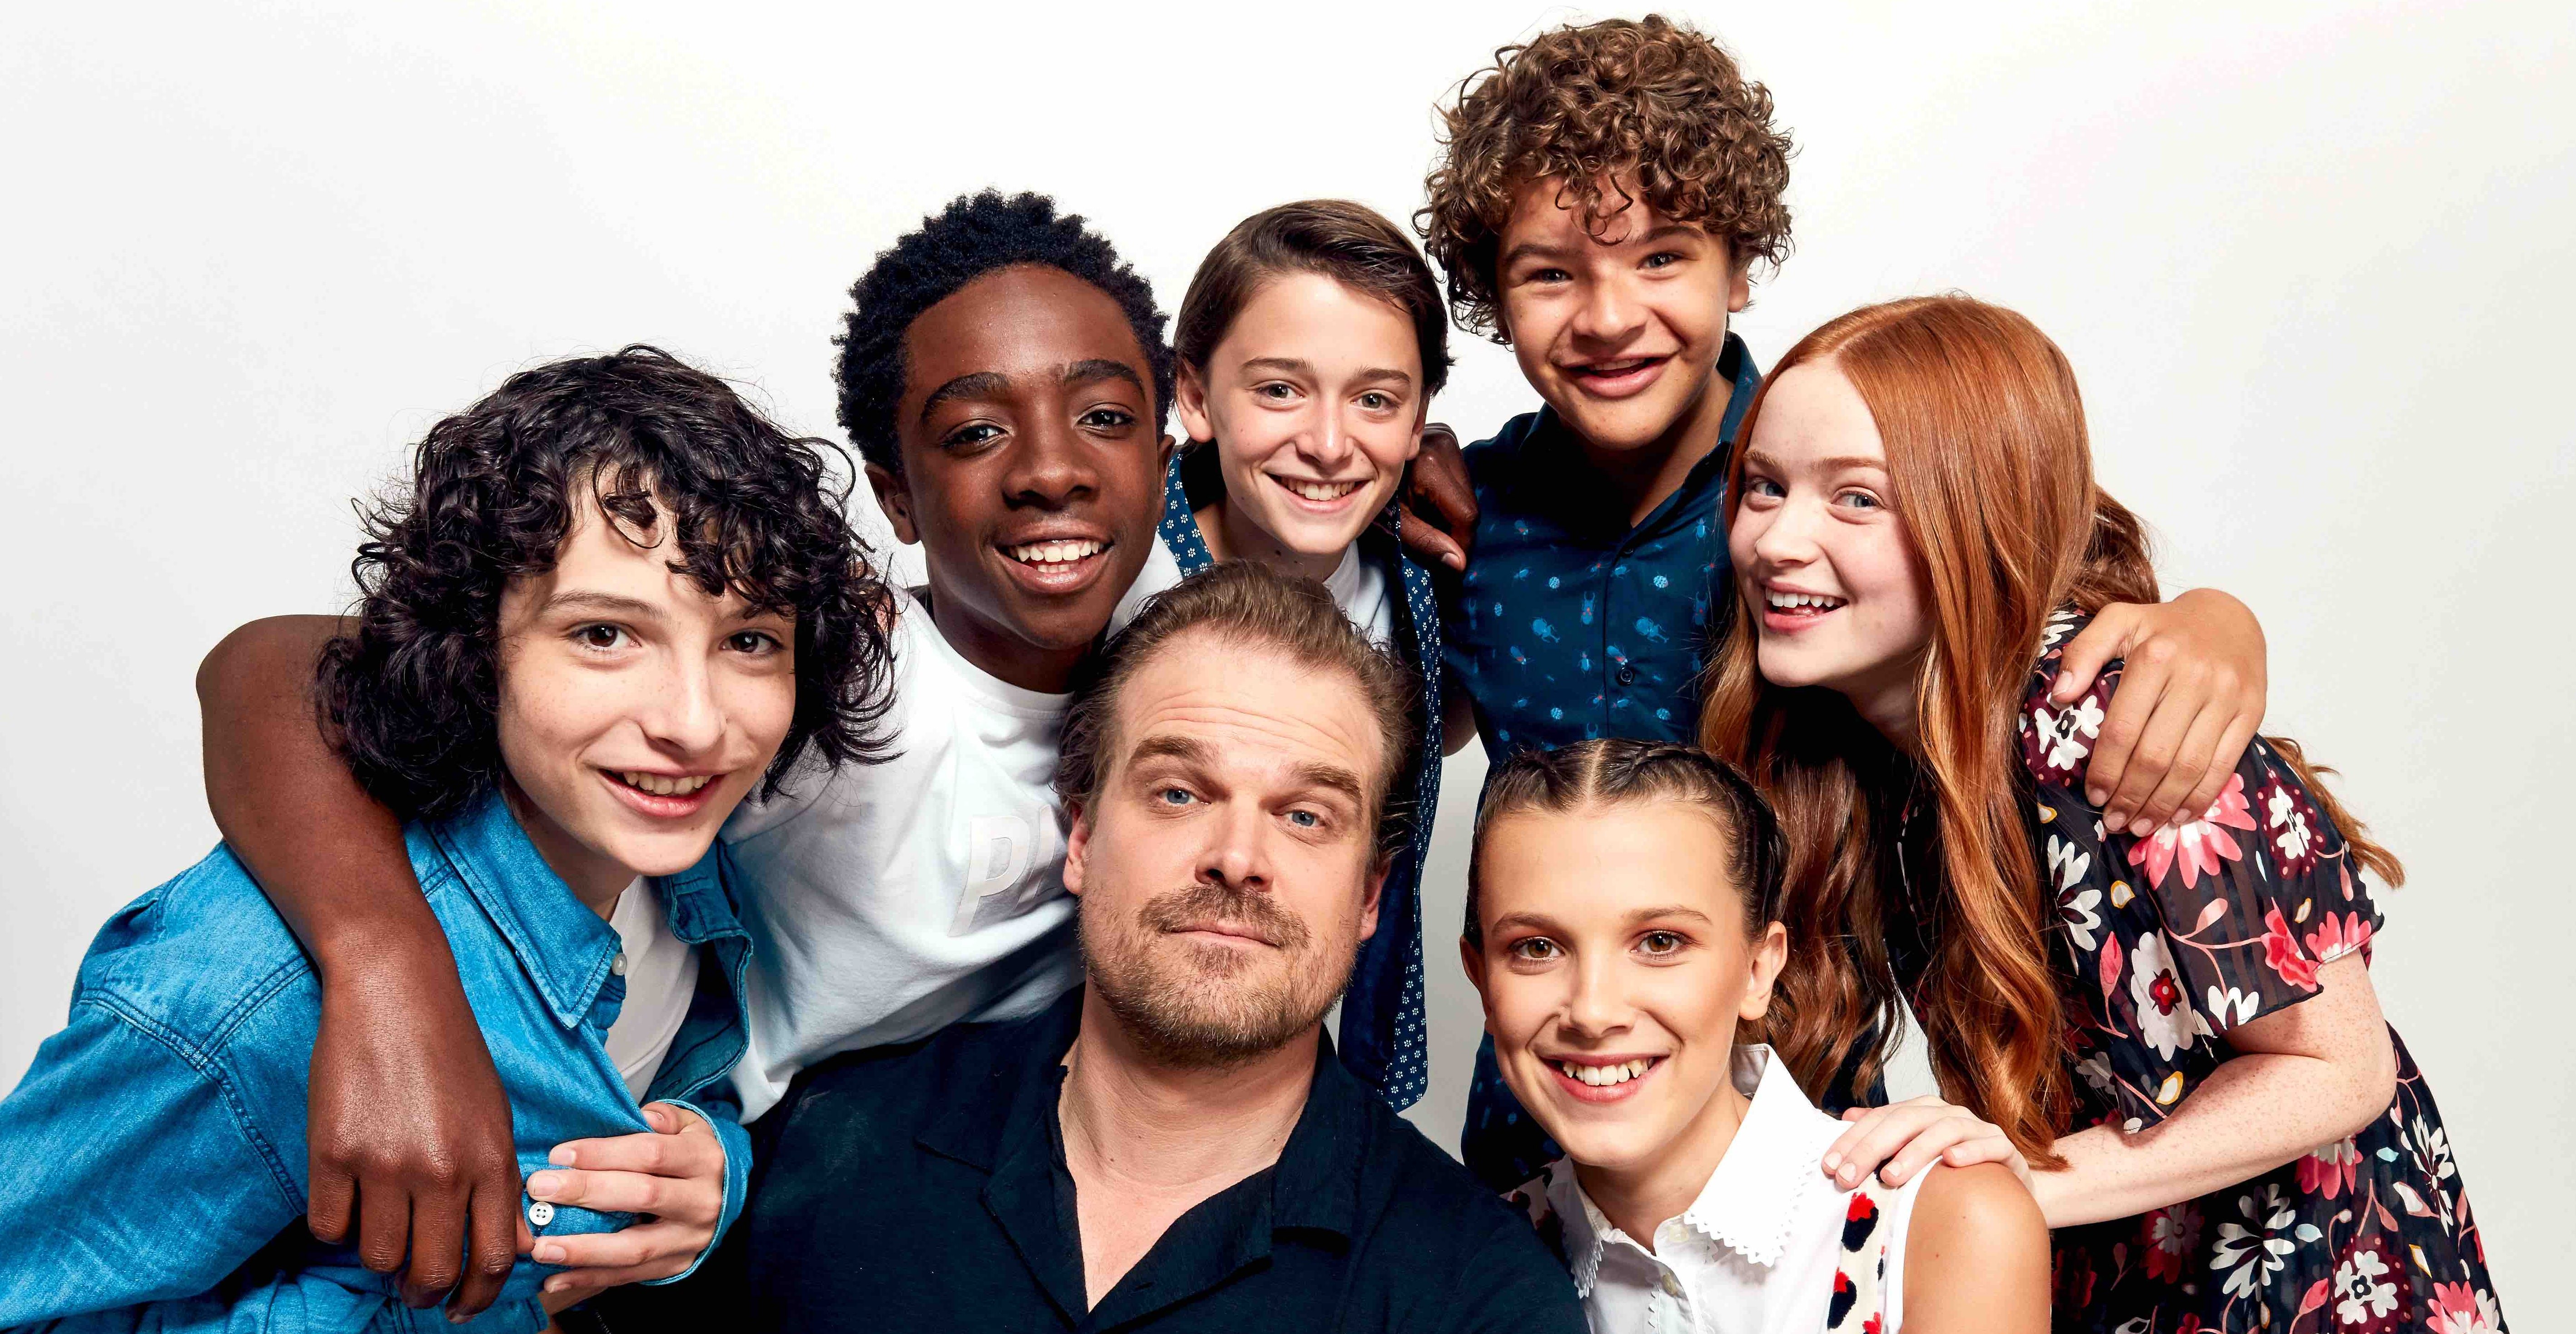 Stranger Things Cast, HD Tv Shows, 4k Wallpapers, Images, Backgrounds